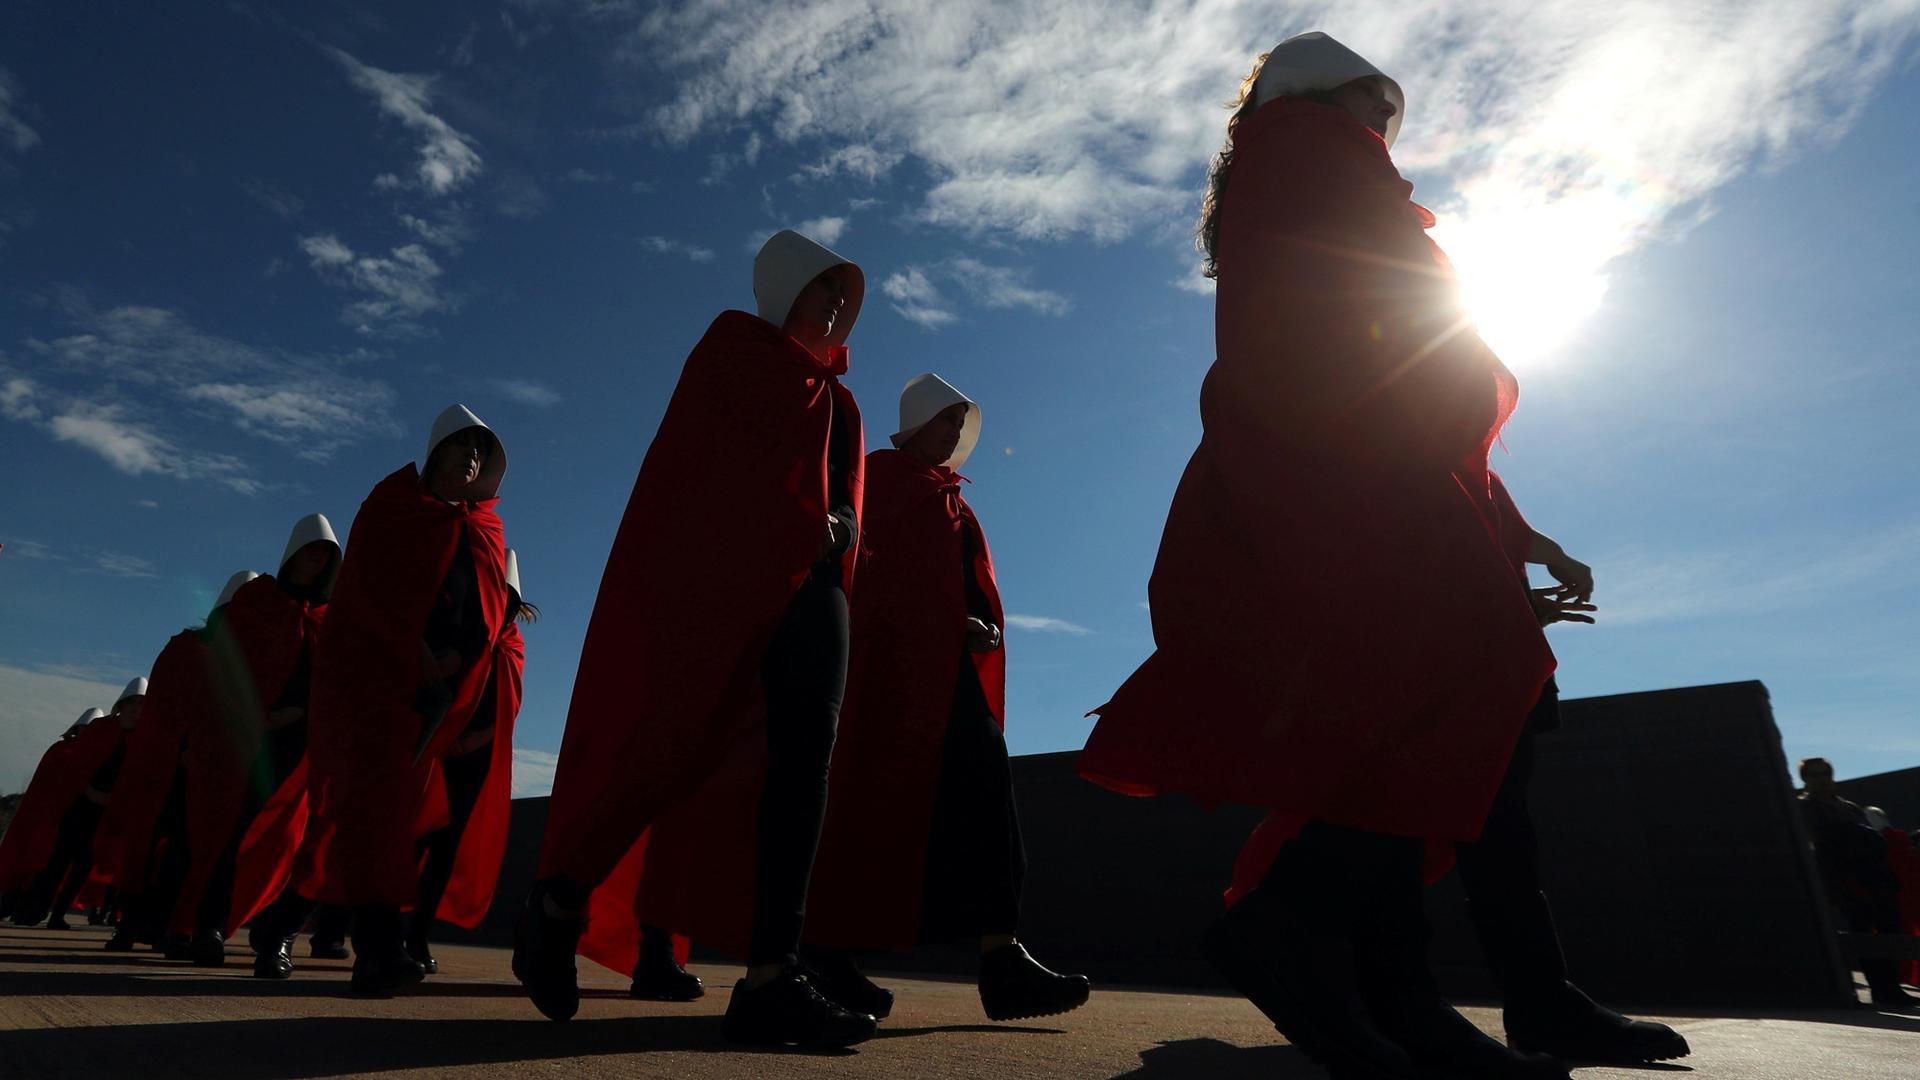 Activists dressed up as characters from "The Handmaid's Tale" are shown back lit from a low perspective.